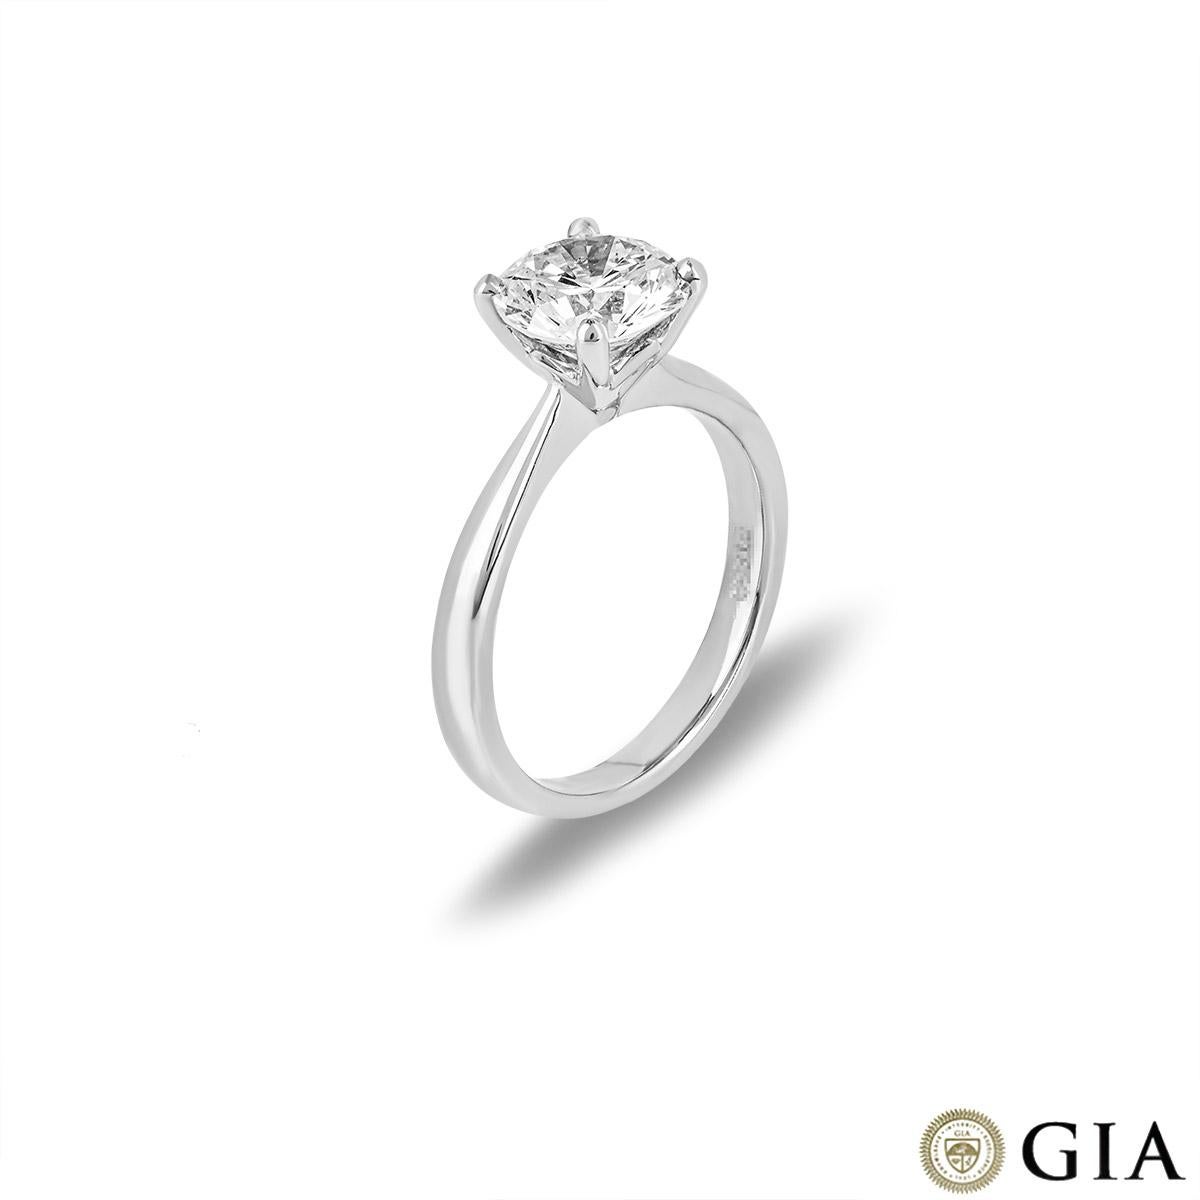 
A platinum round brilliant cut diamond solitaire ring. The ring comprises of a round brilliant cut diamond in a four claw setting with a weight of 2.00ct, L colour and SI1 clarity. The ring is currently a size M but can be adjusted for a perfect